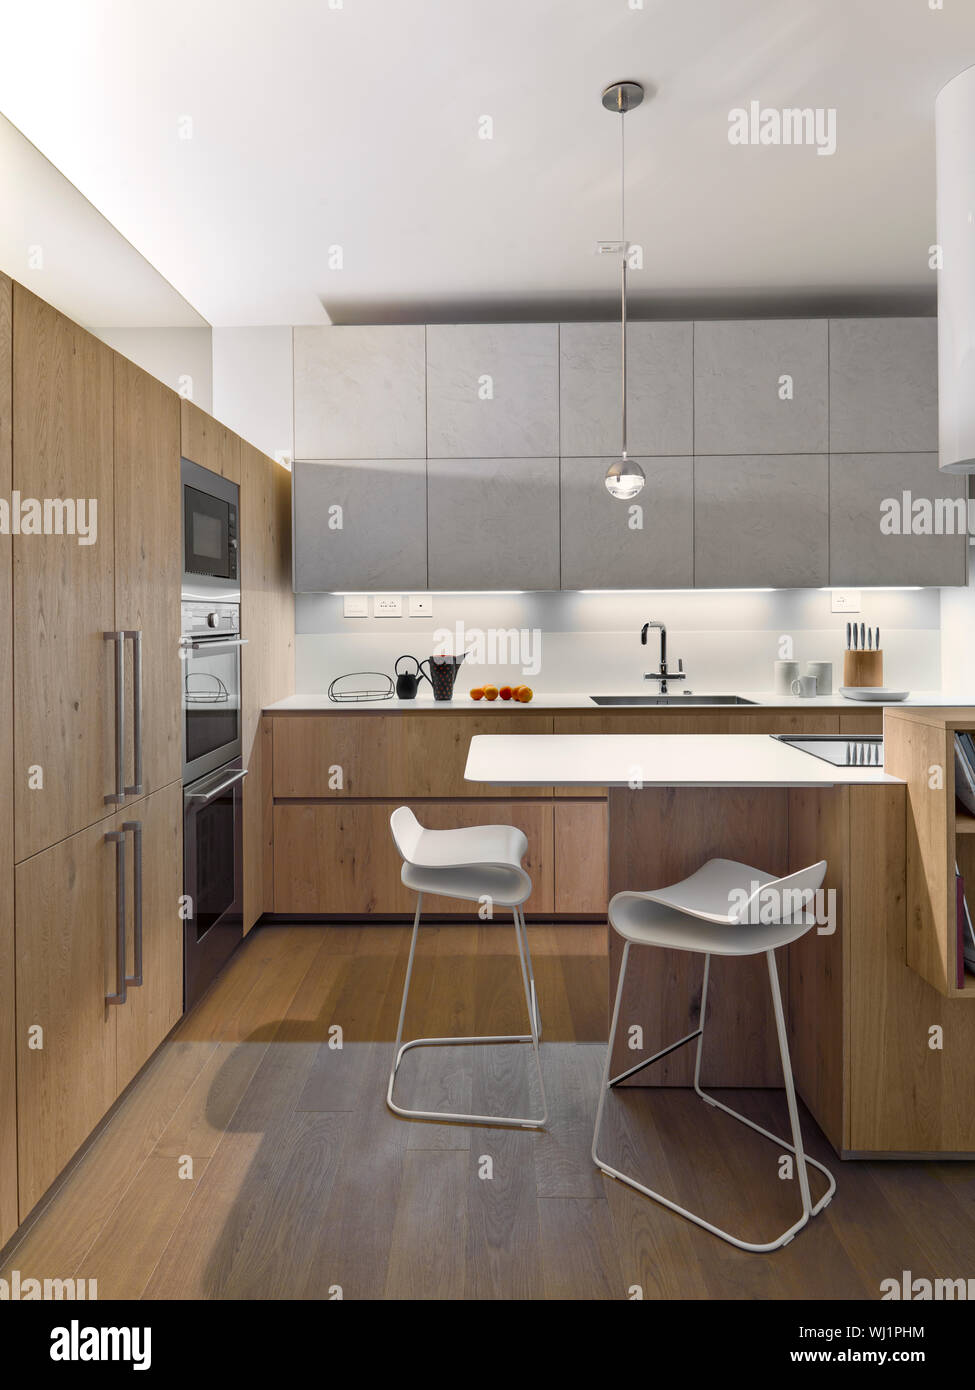 interiors shots of a modern wooden kitchen the floor is made of wood Stock Photo